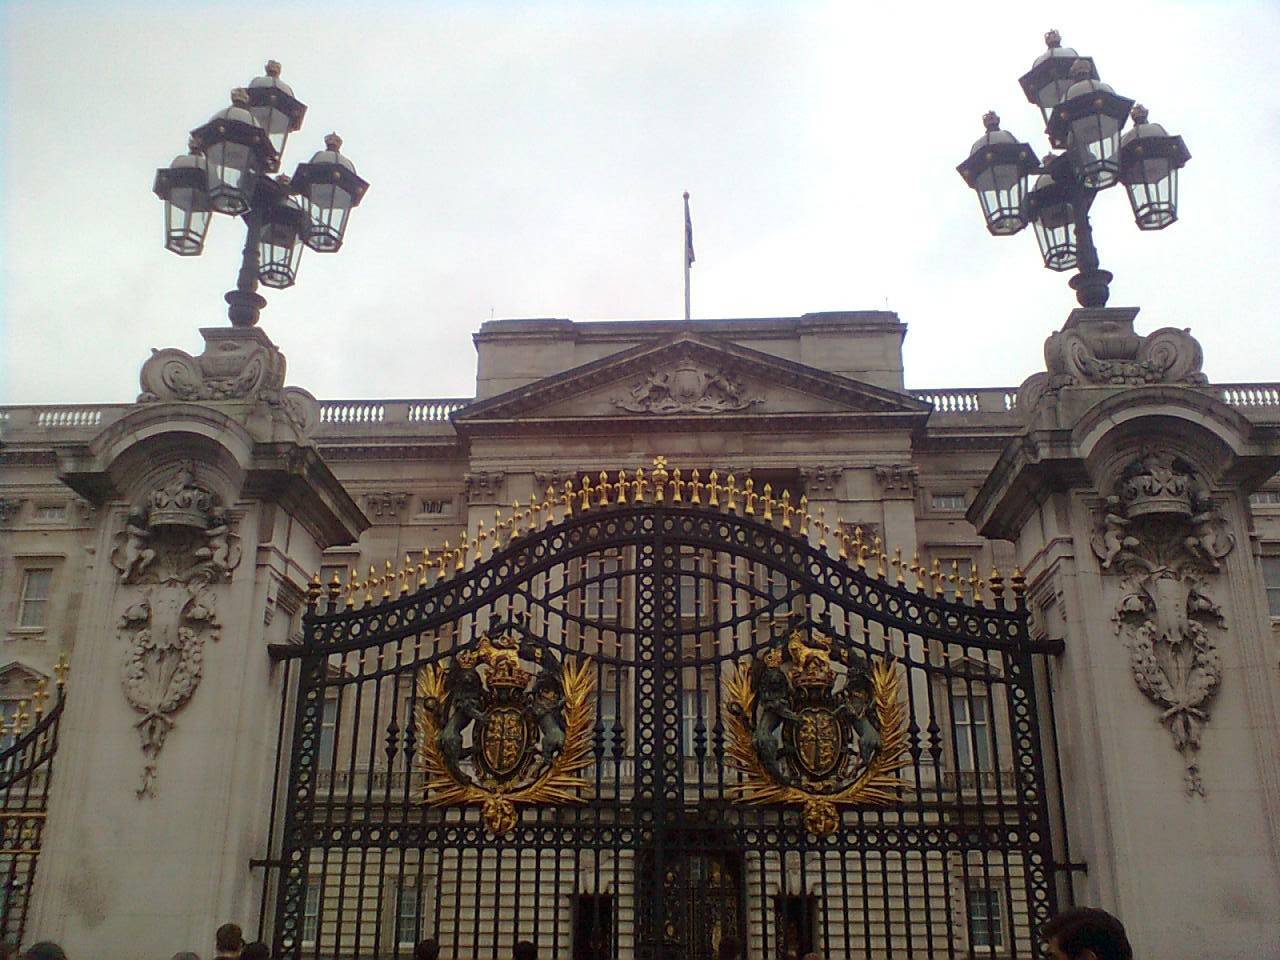 I went to London to see the Queen: Visiting Buckingham Palace 